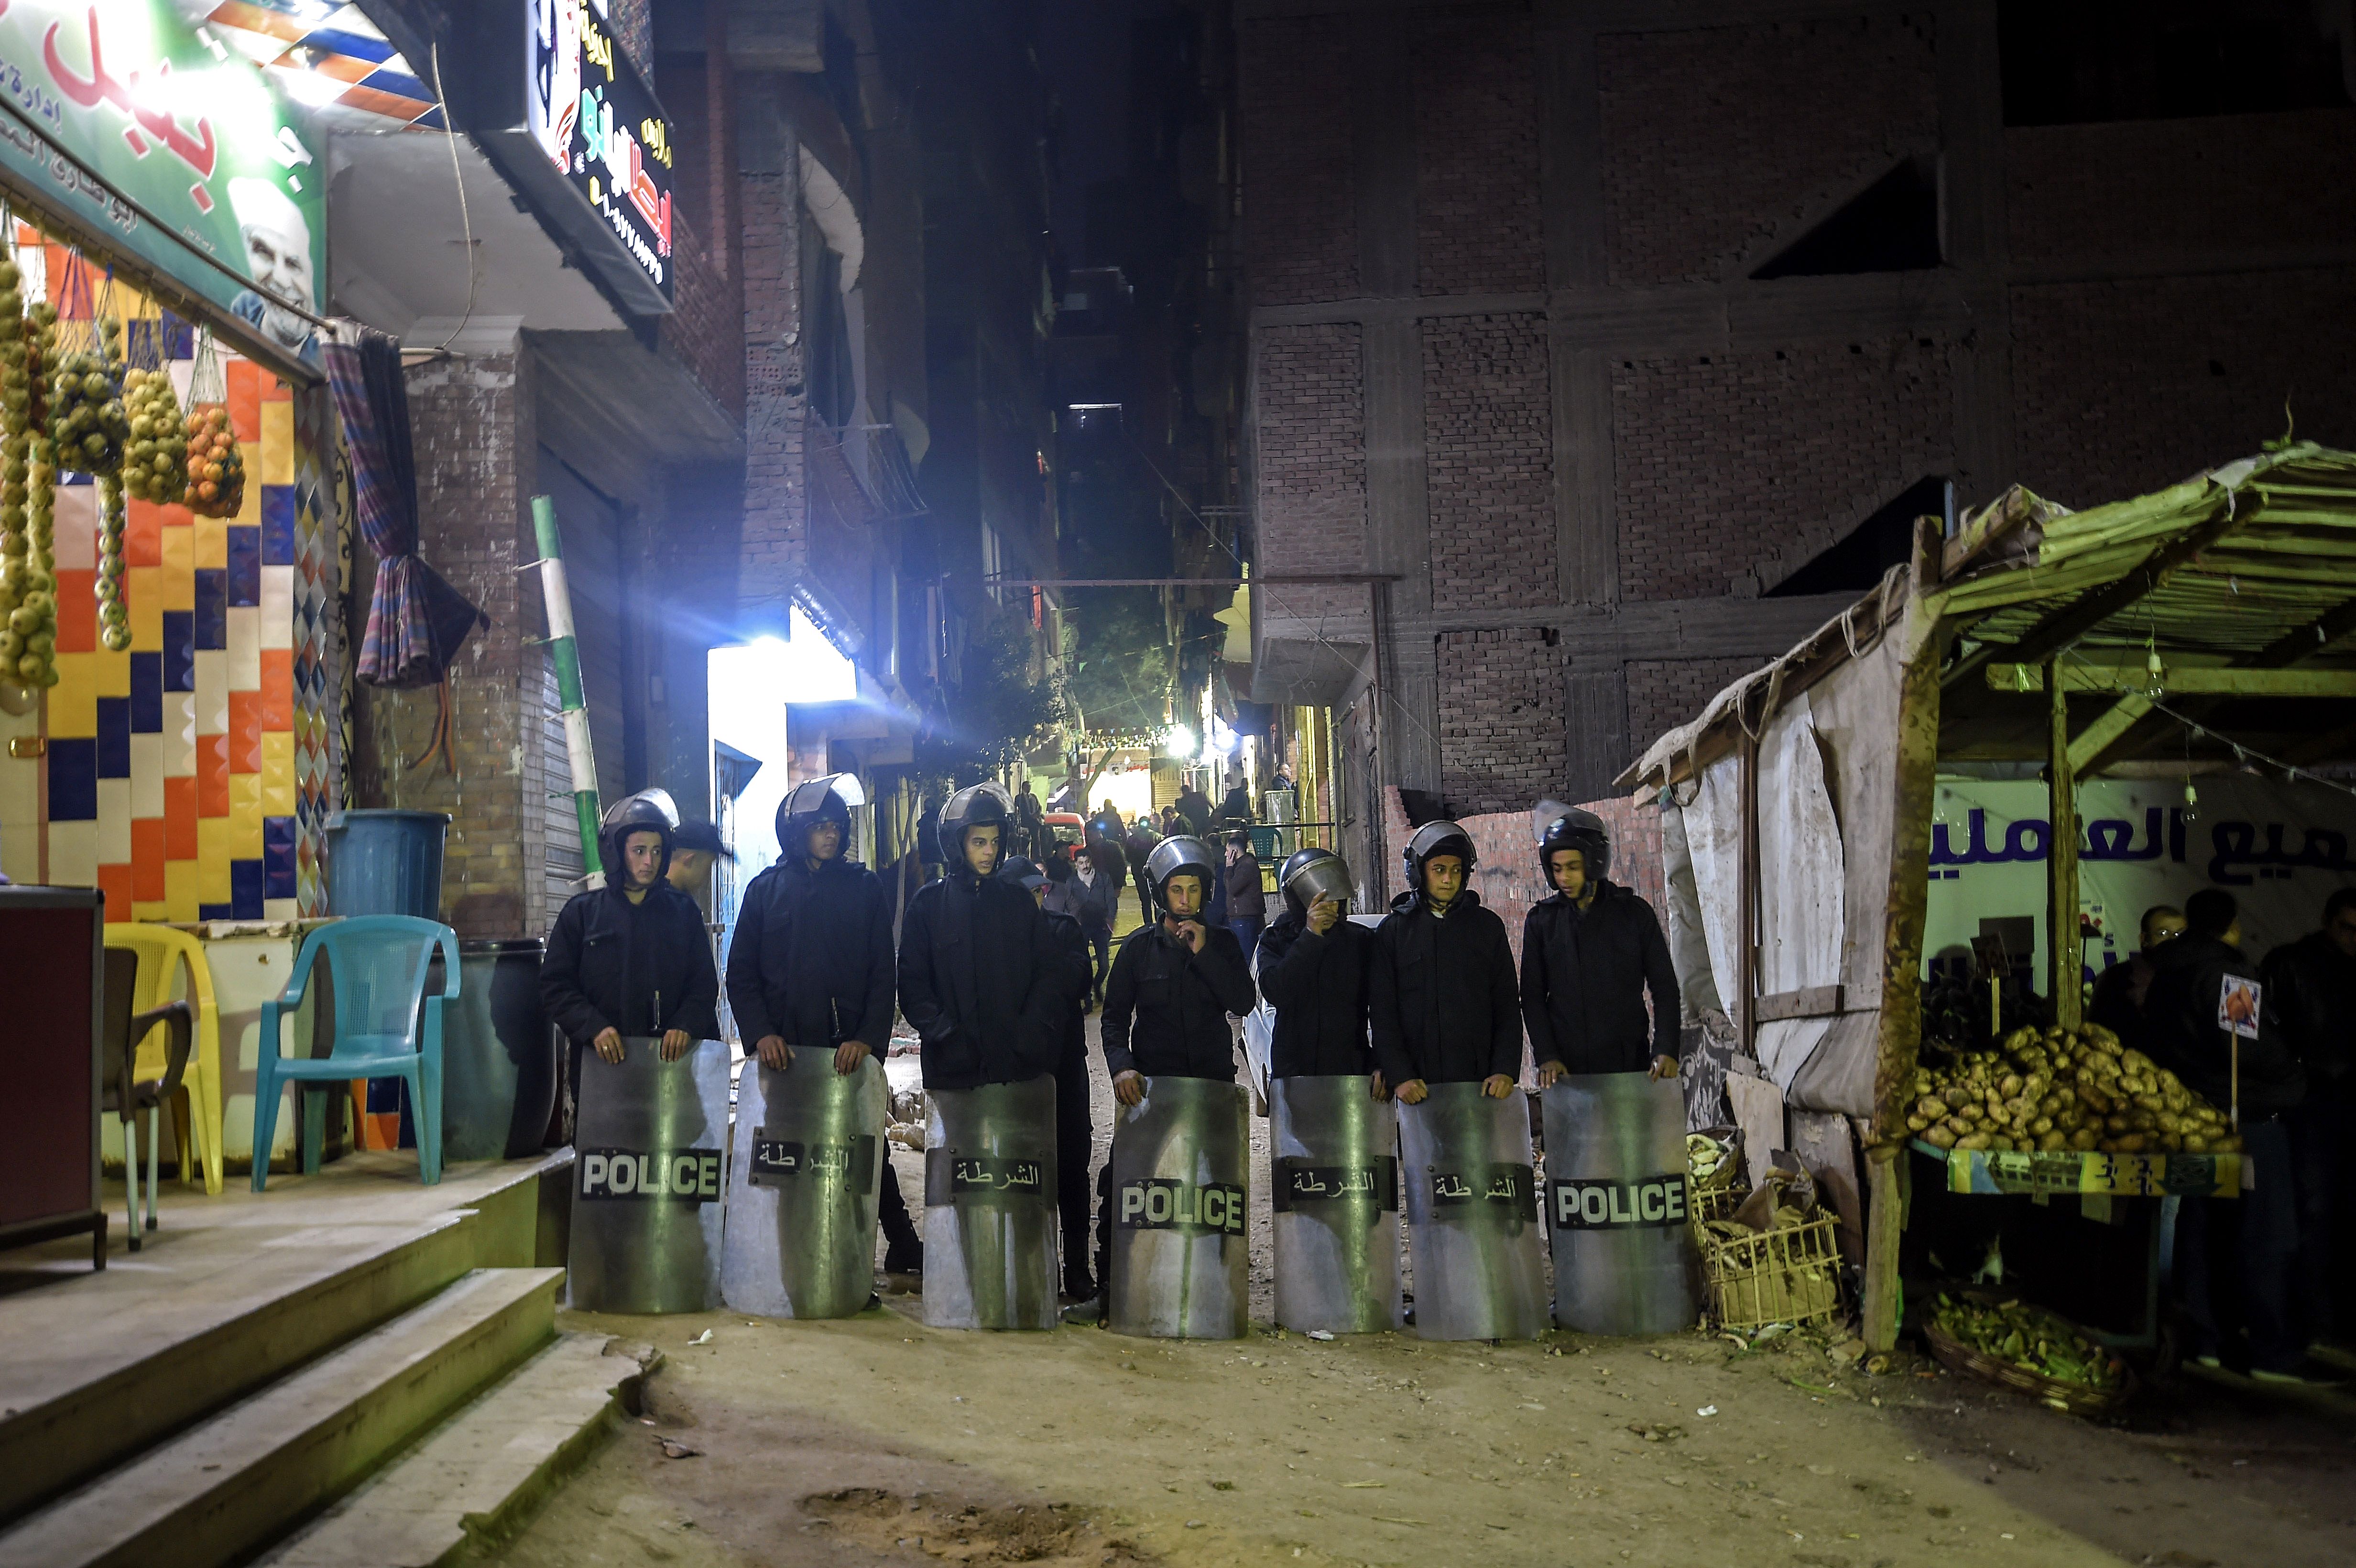 Security forces guard a street leading to the church were an expolosion ocurred leaving one casualty, in Cairo on January 5, 2019. - A policeman was killed while trying to dismantle an explosive device outside a Coptic church in Egypt on Saturday, January 5, 2019, a security source said. Two other officers were also wounded in the explosion as security personnel attempted to defuse the device in Nasr City on the edge of Cairo, the source added. (MOHAMED EL-SHAHED/AFP/Getty Images)